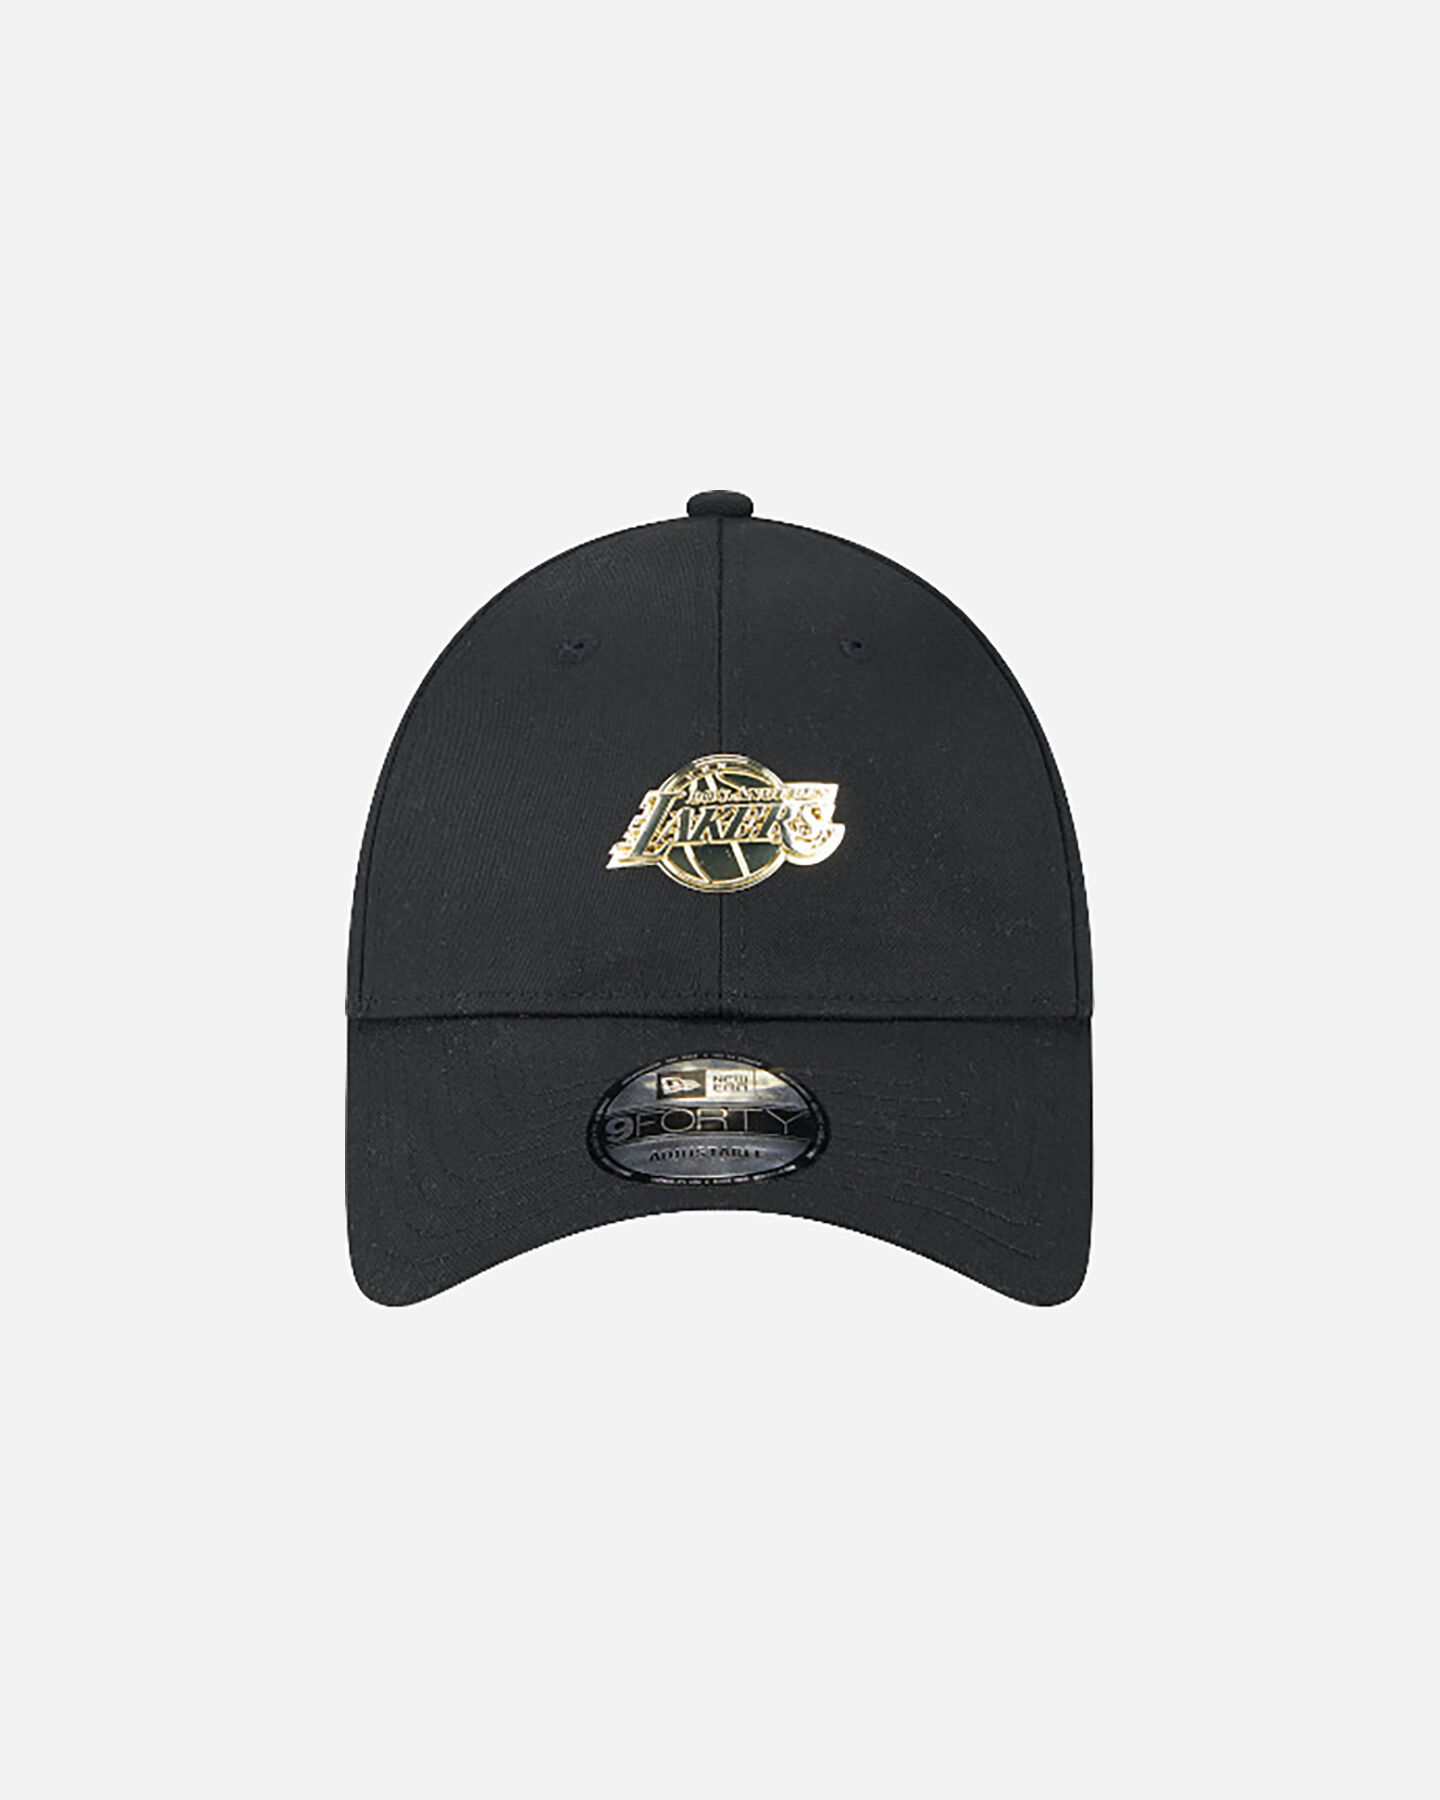  Cappellino NEW ERA 9FORTY METALLIC PIN LOS ANGELES LAKERS  S5630868|001|OSFM scatto 1